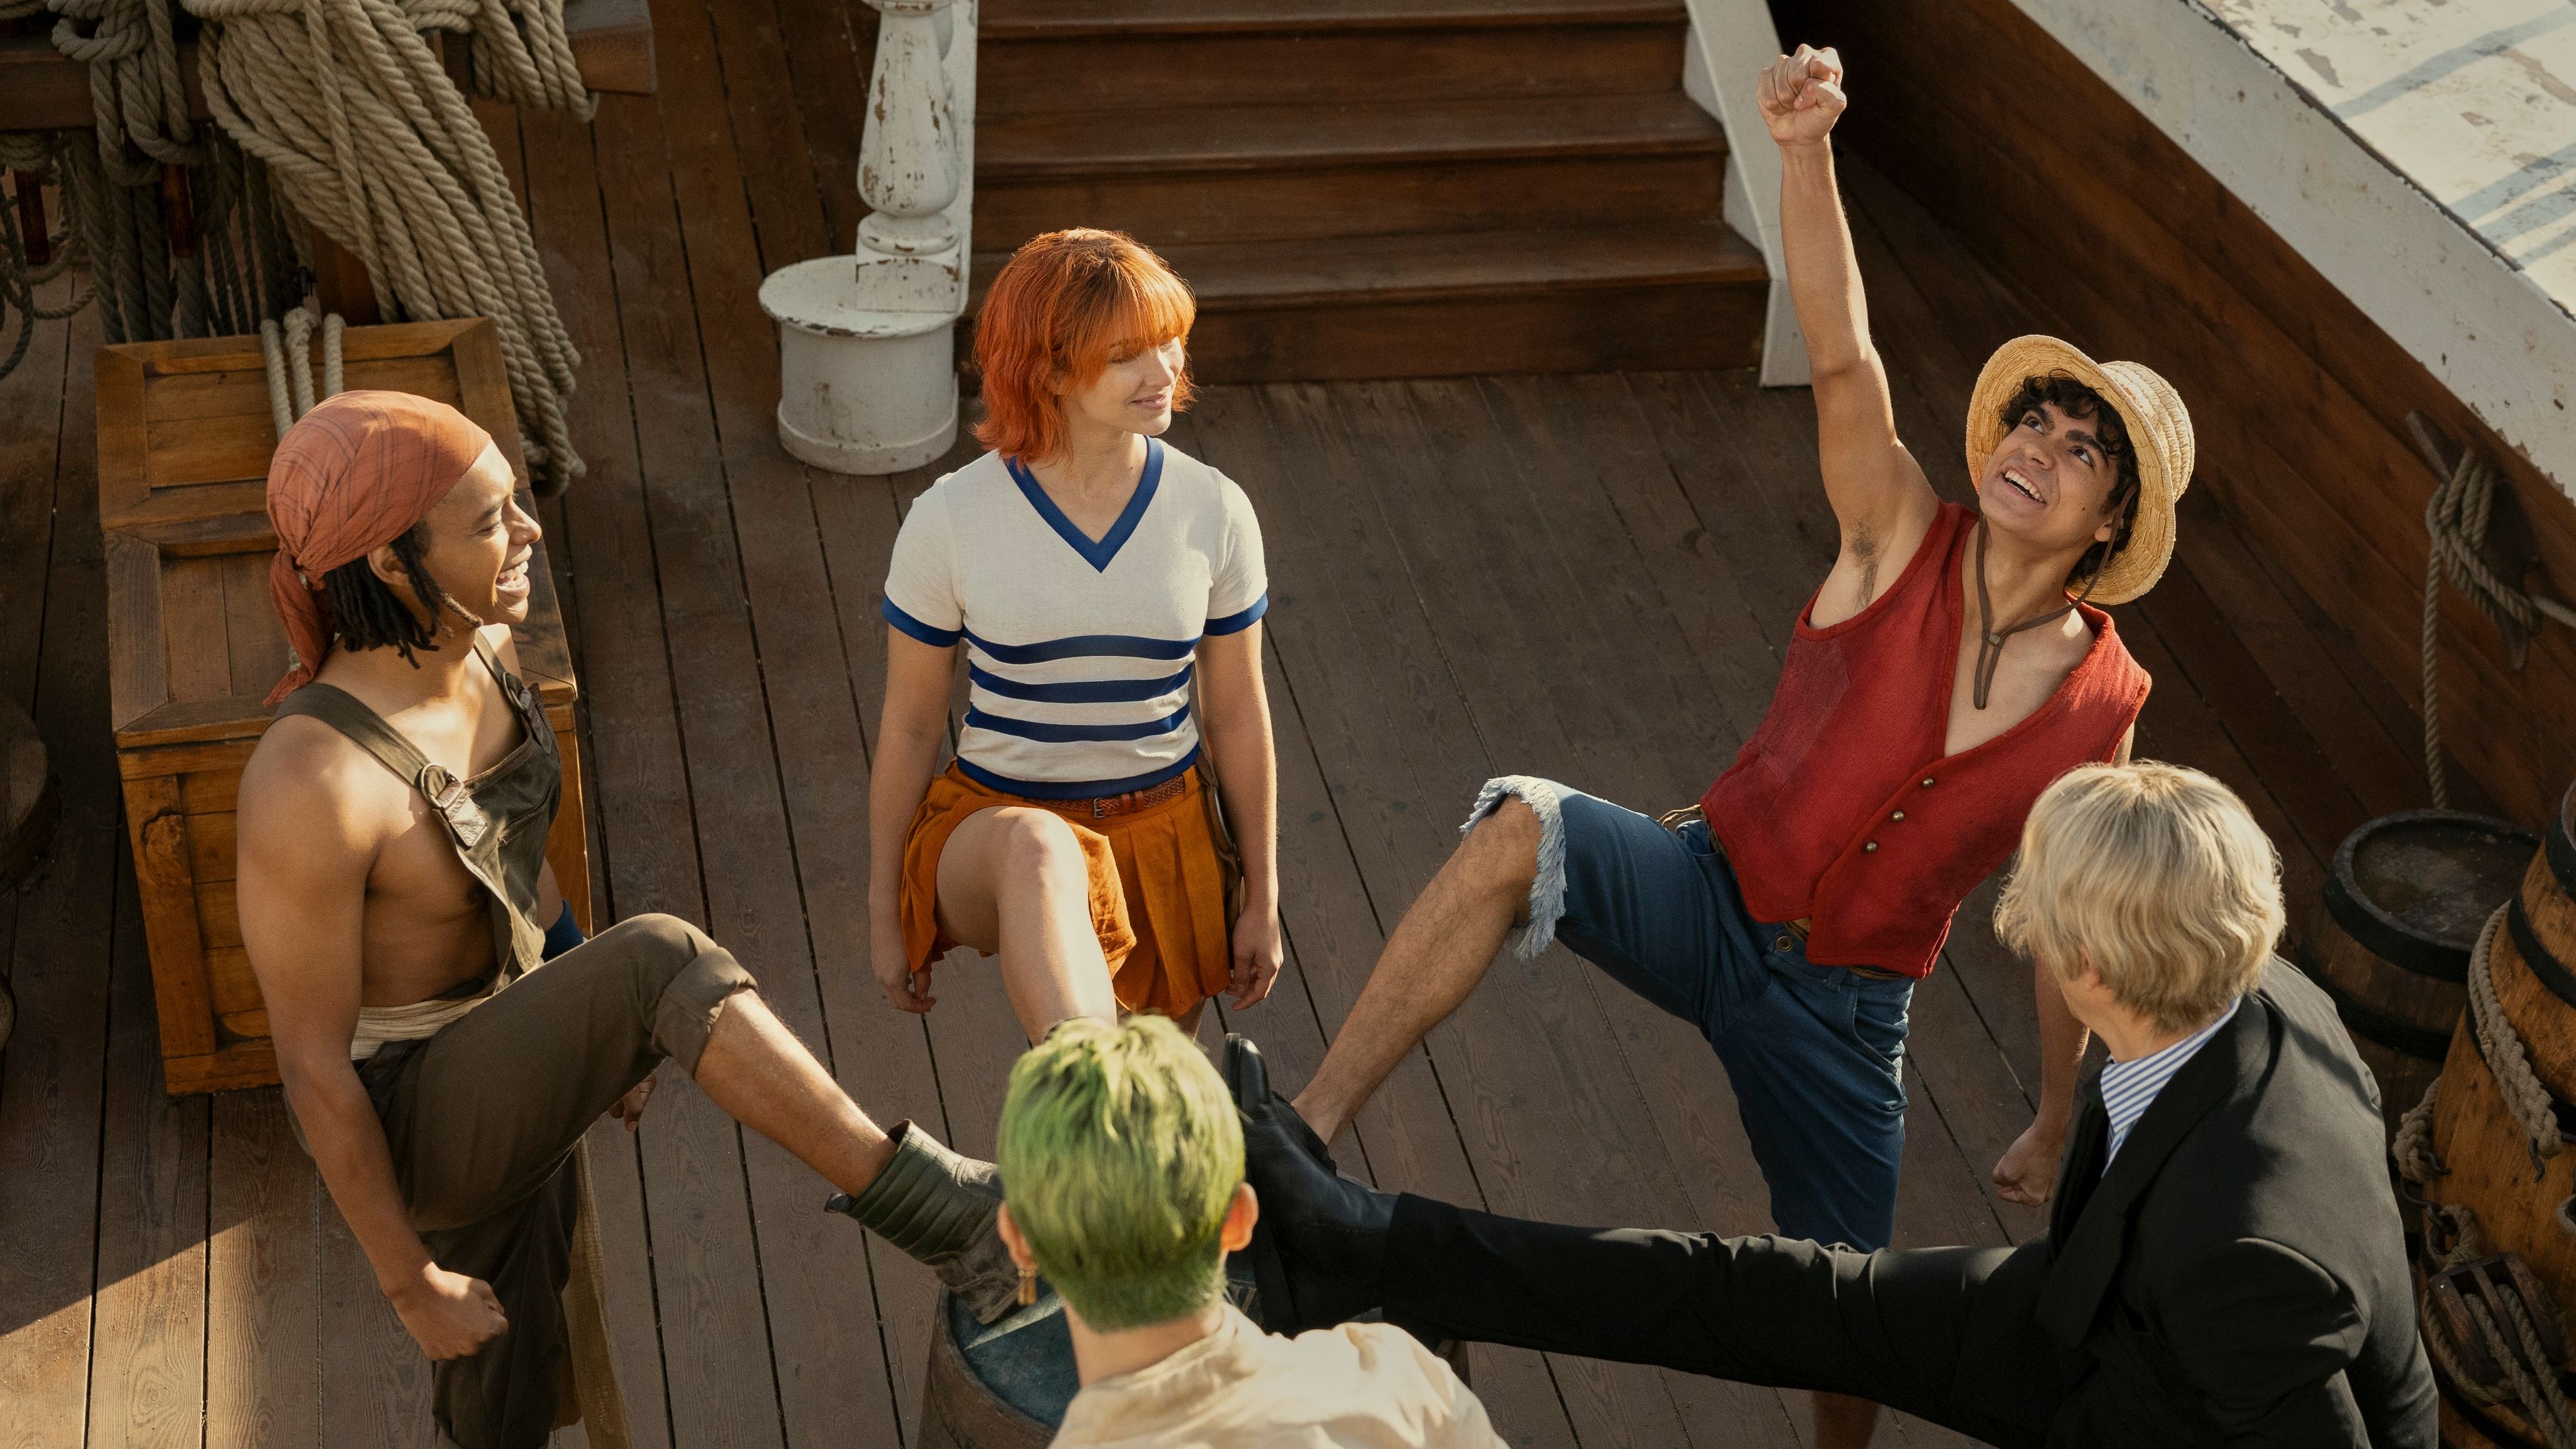 Here is the Final Trailer for the Live Action 'One Piece' – The